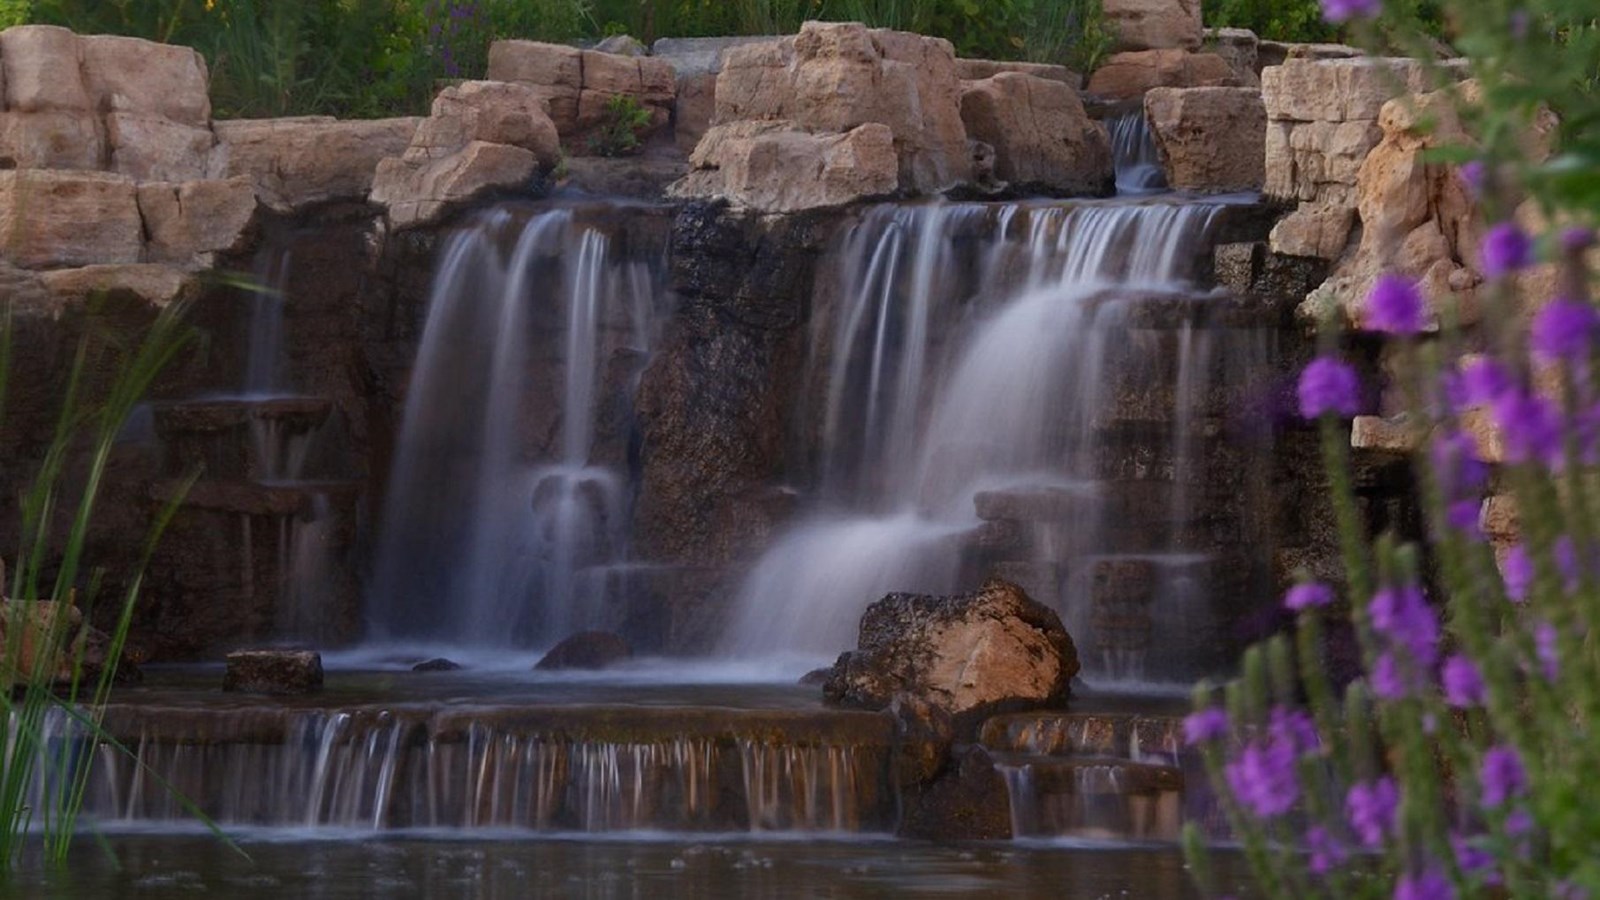 Water tumbles over sandstone to a pool below, surrounded by lush greenery and purple flowers